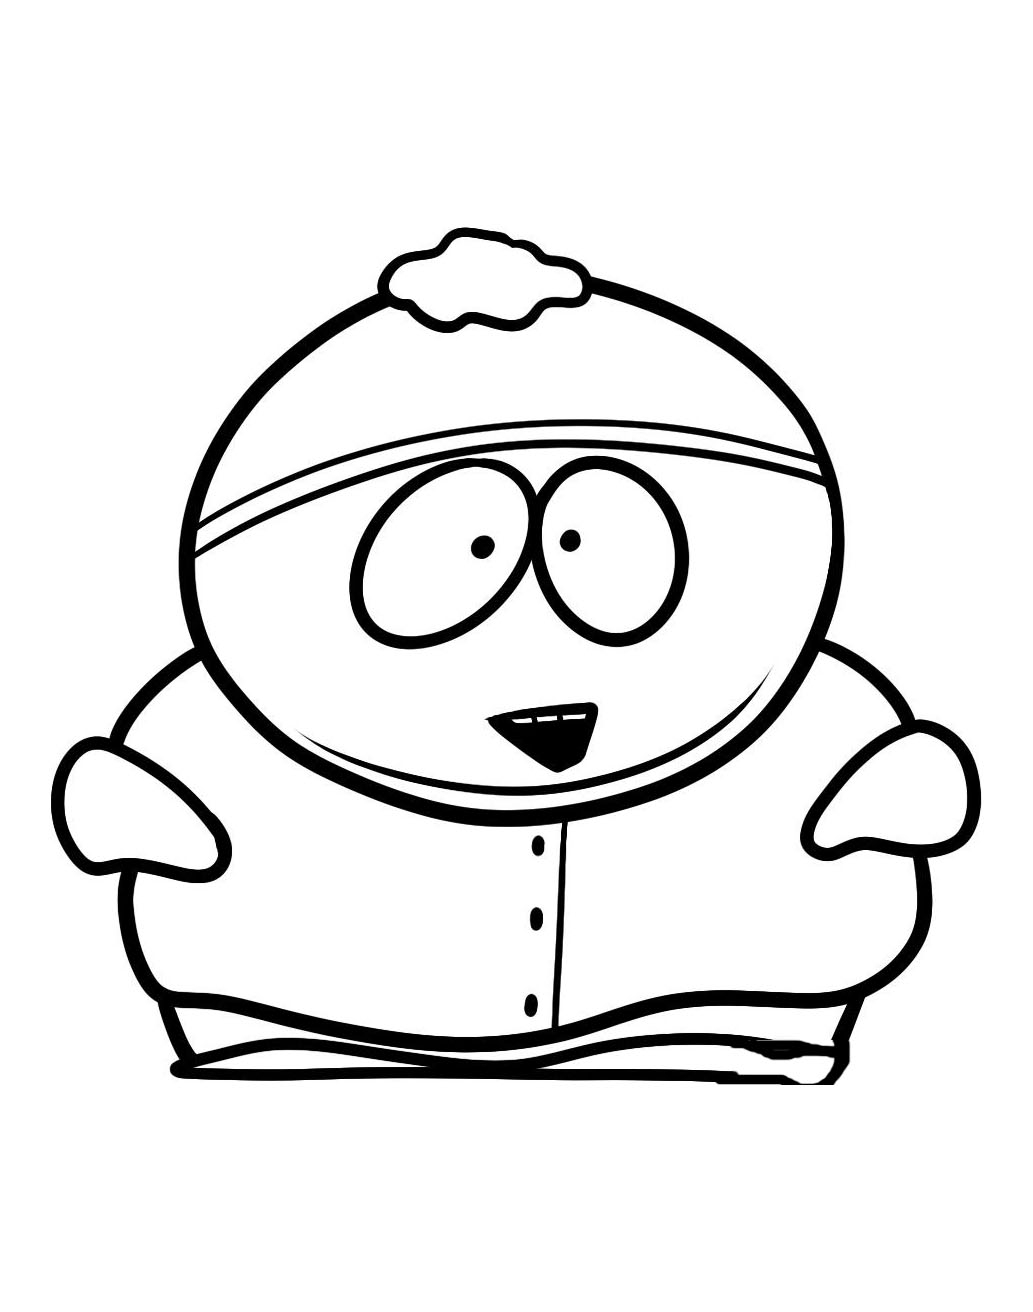 South Park Coloring Page South Park For Children South Park Kids Coloring Pages